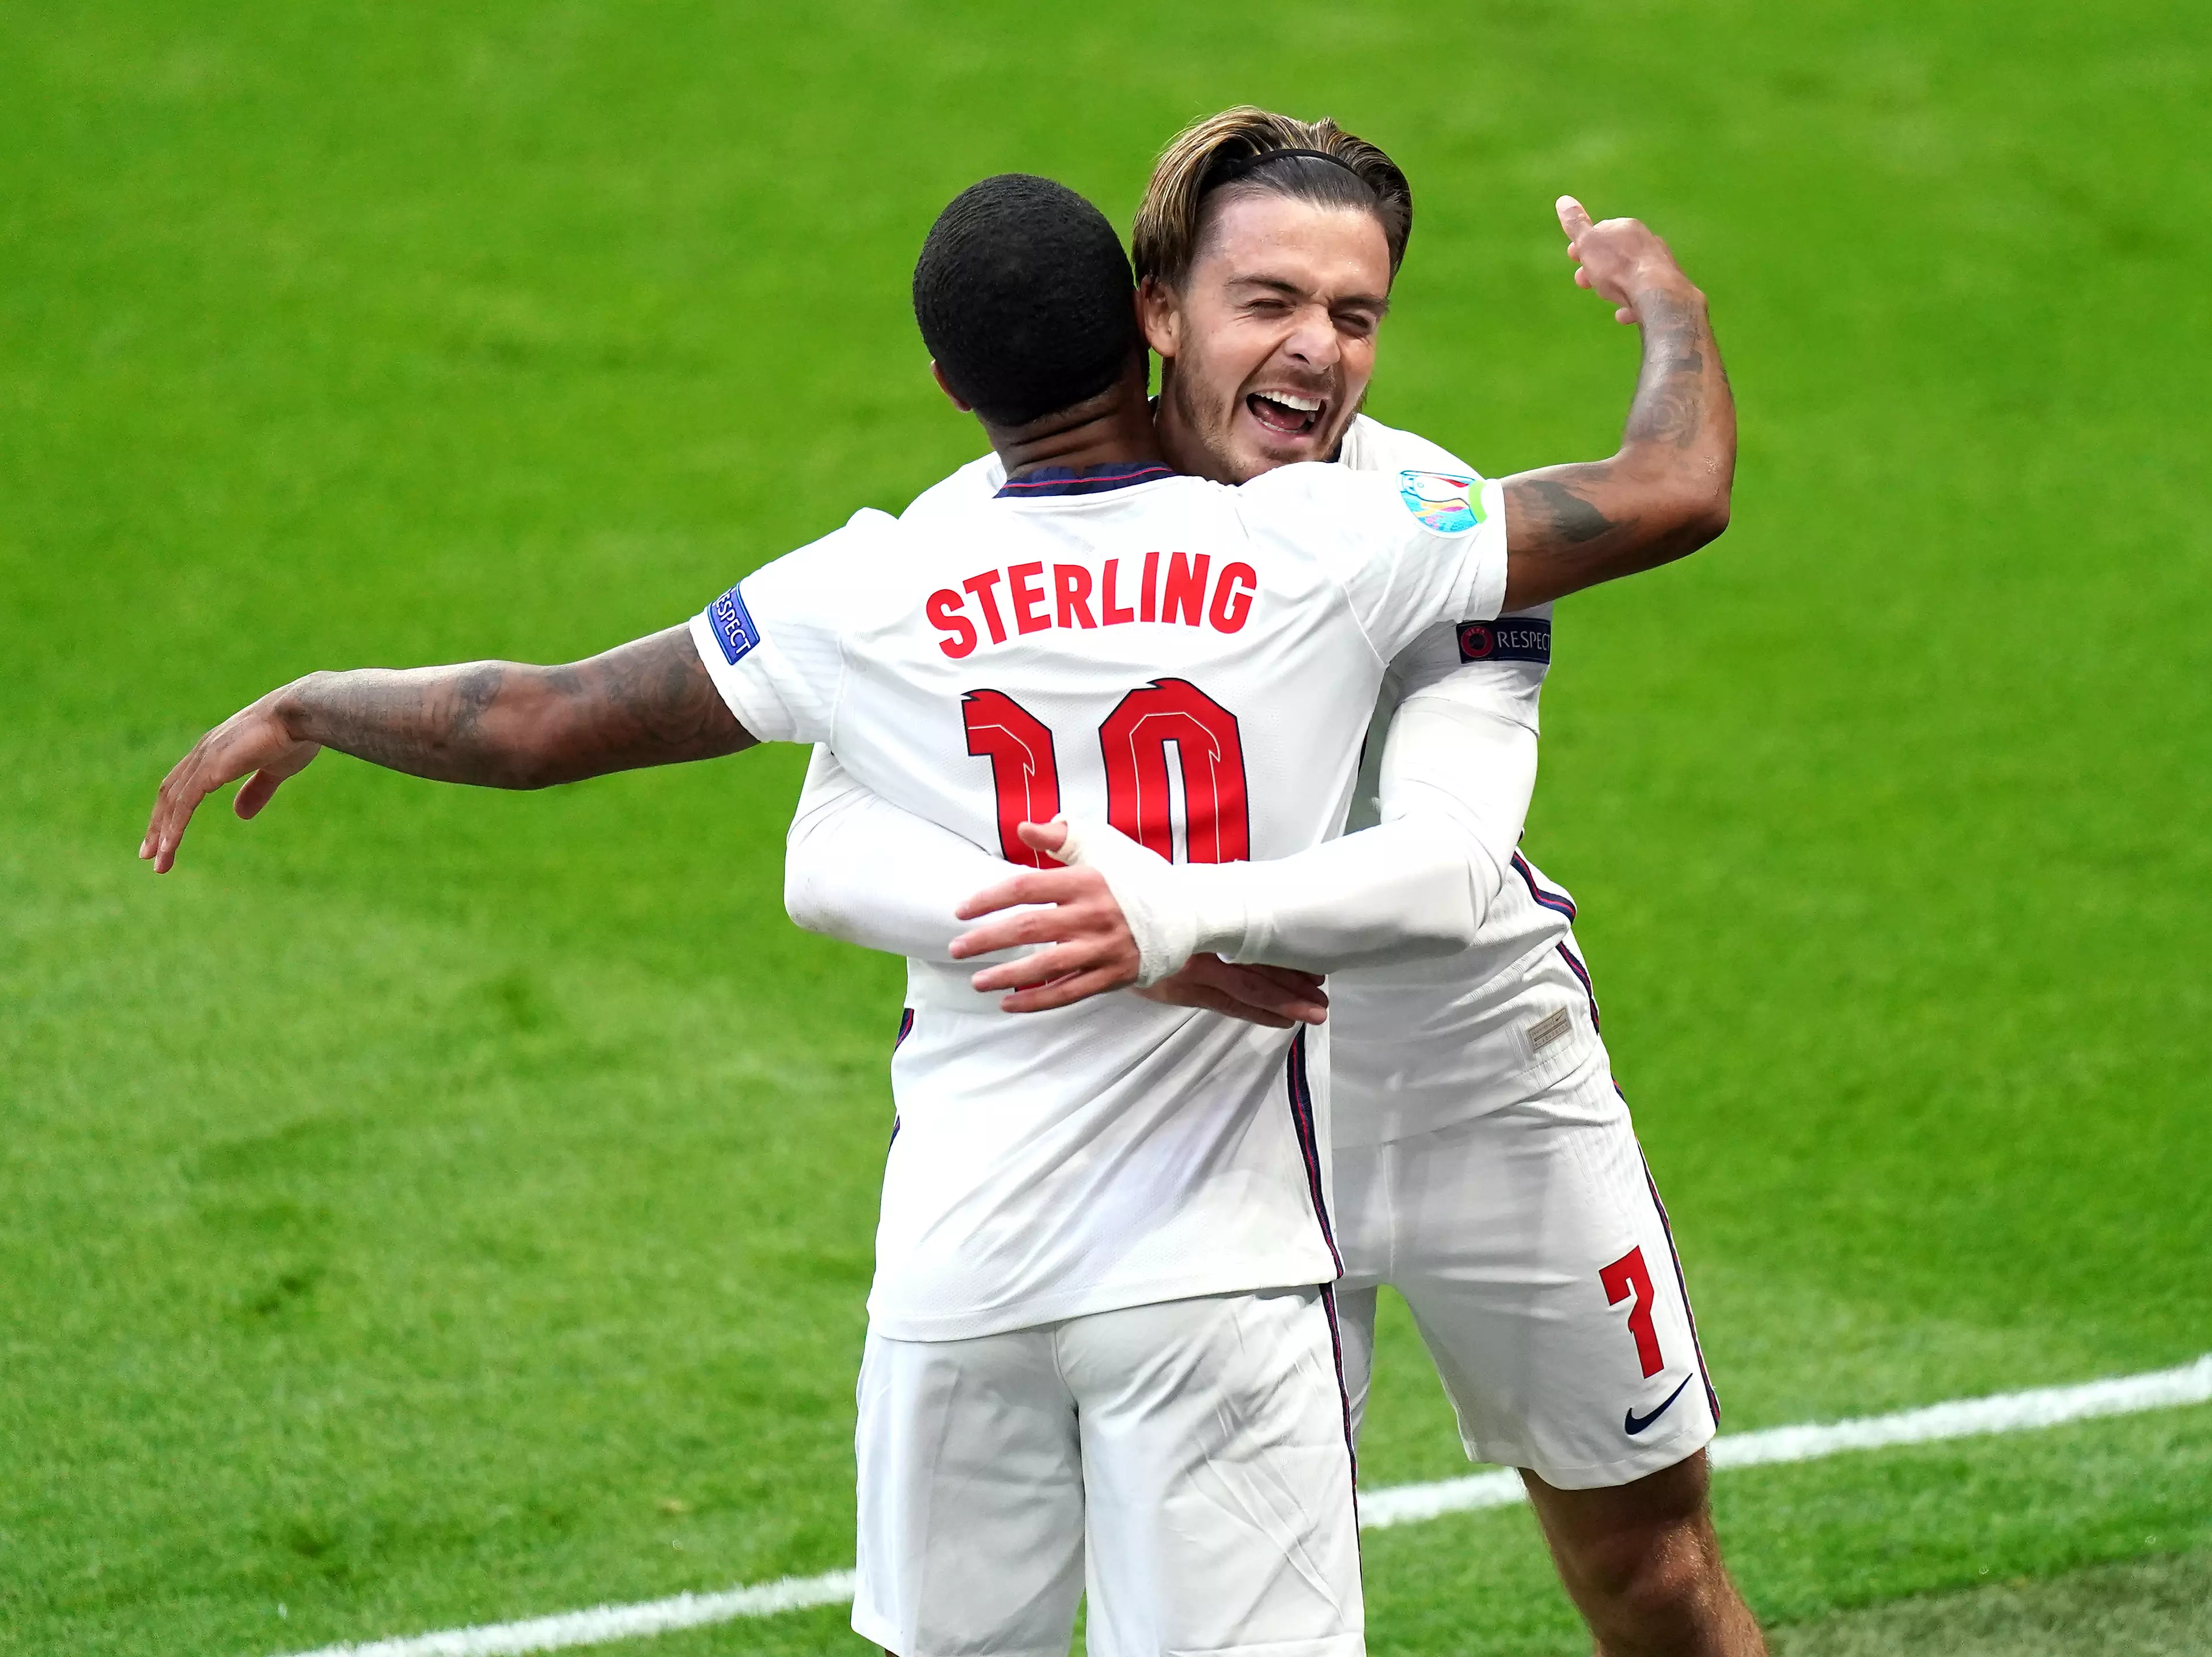 Grealish celebrating with potential new teammate Raheem Sterling. Image: PA Images